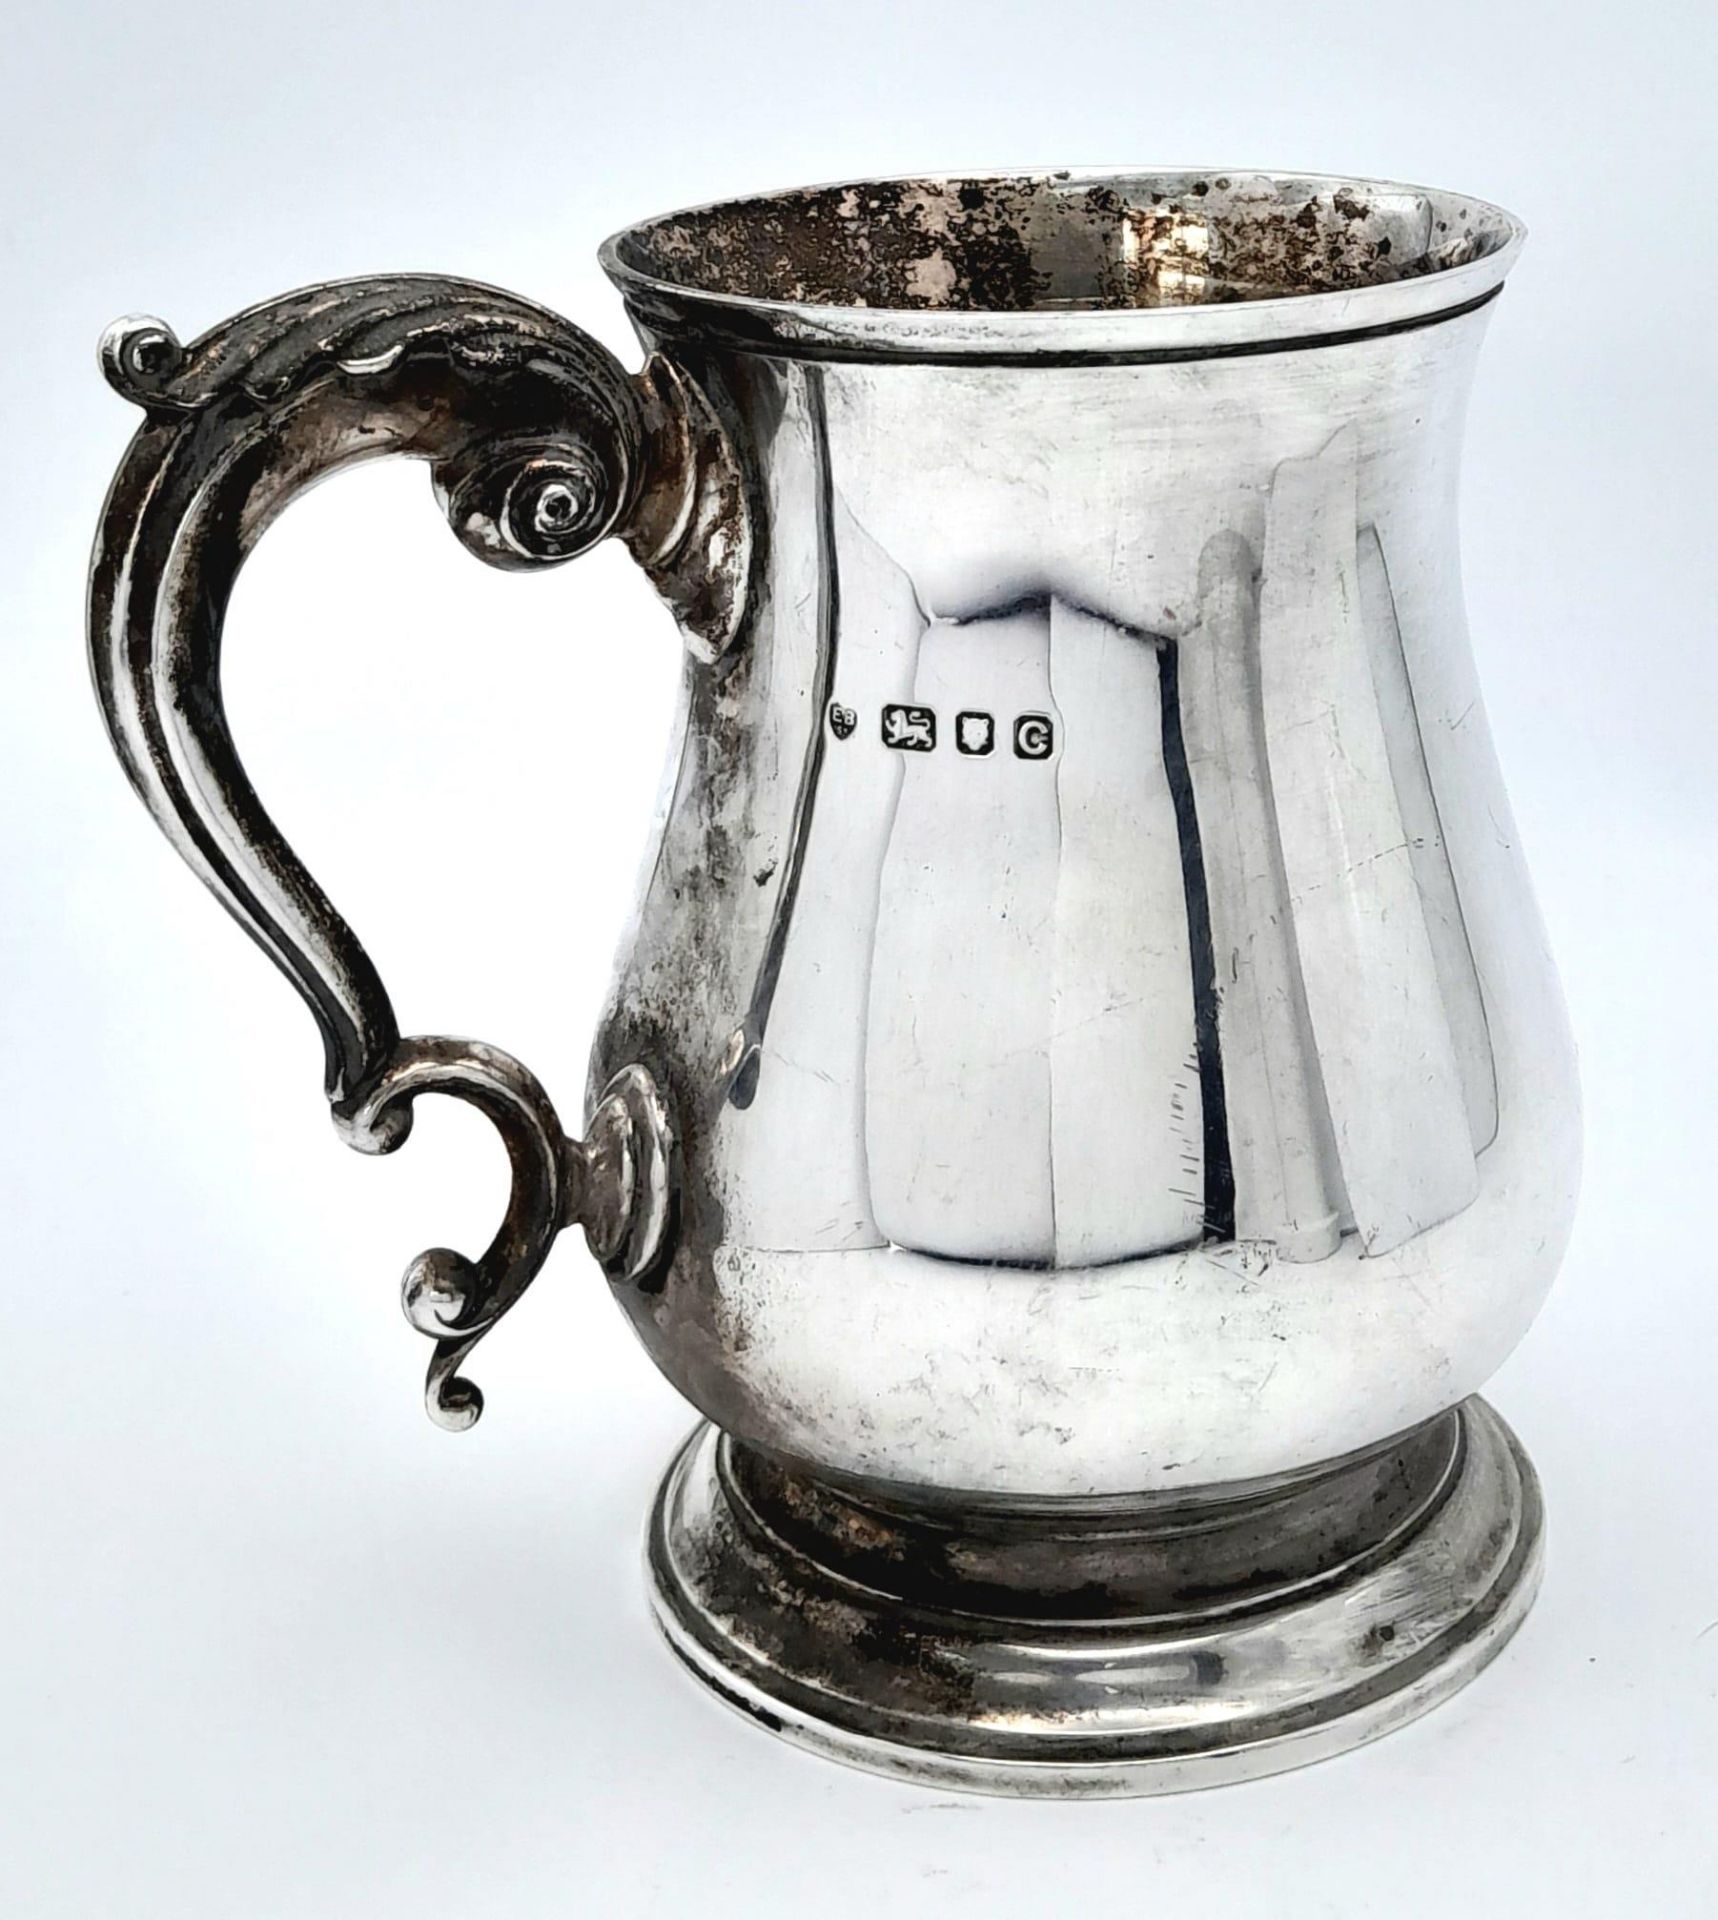 A Sterling Silver Tankard - Given to Gareth Smith of 'The Thrusters' - Winning regional darts team - Image 3 of 7